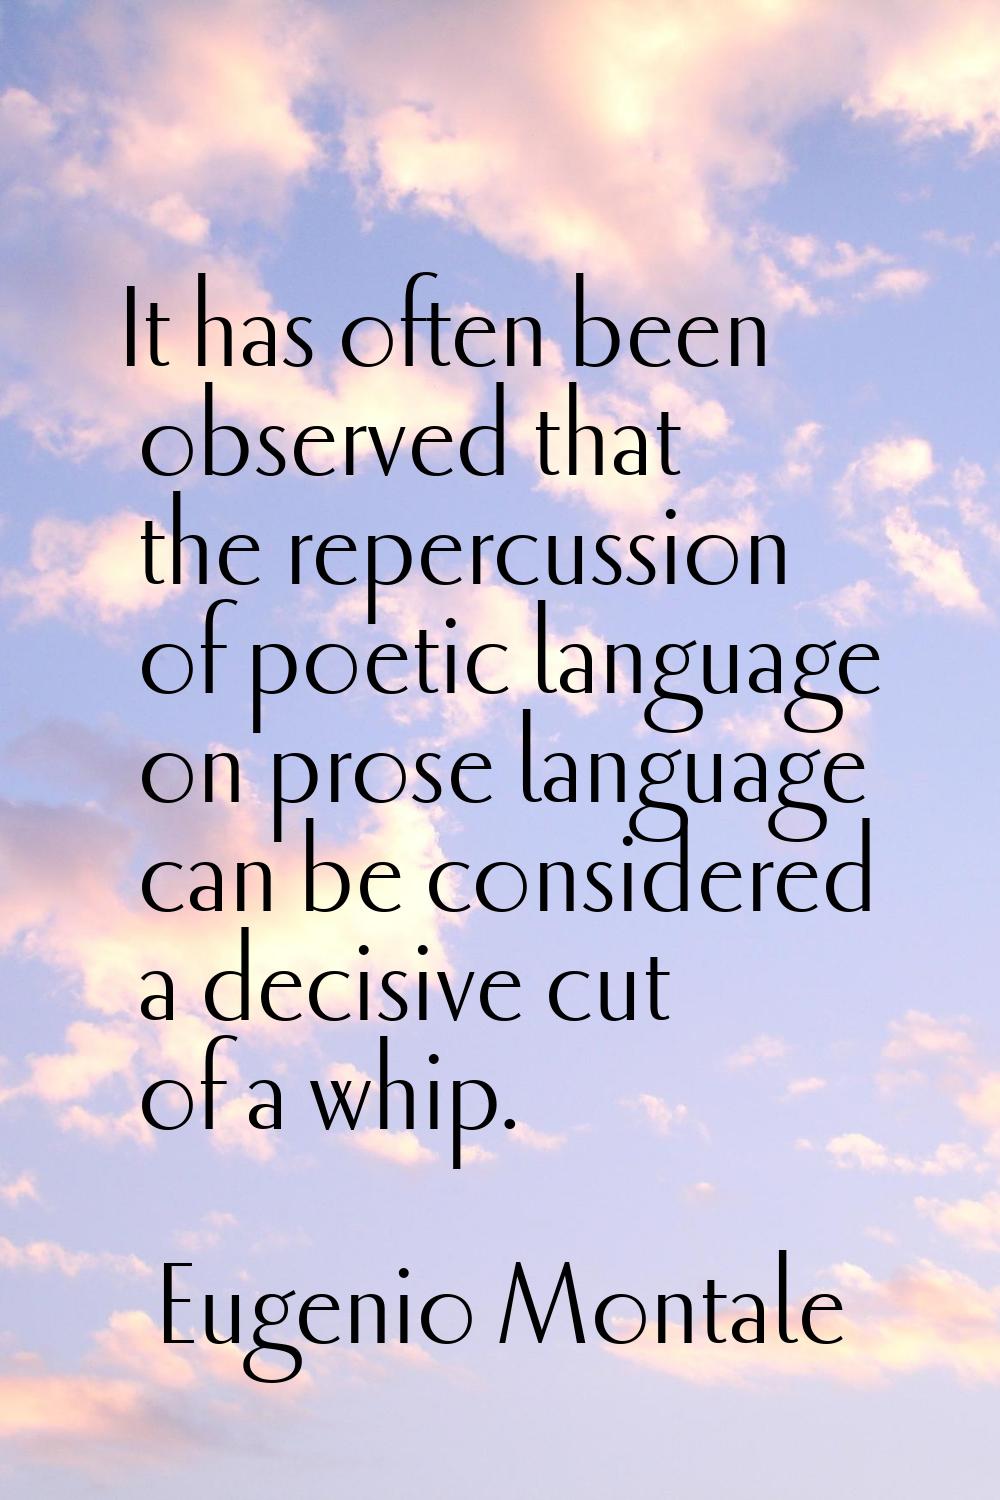 It has often been observed that the repercussion of poetic language on prose language can be consid